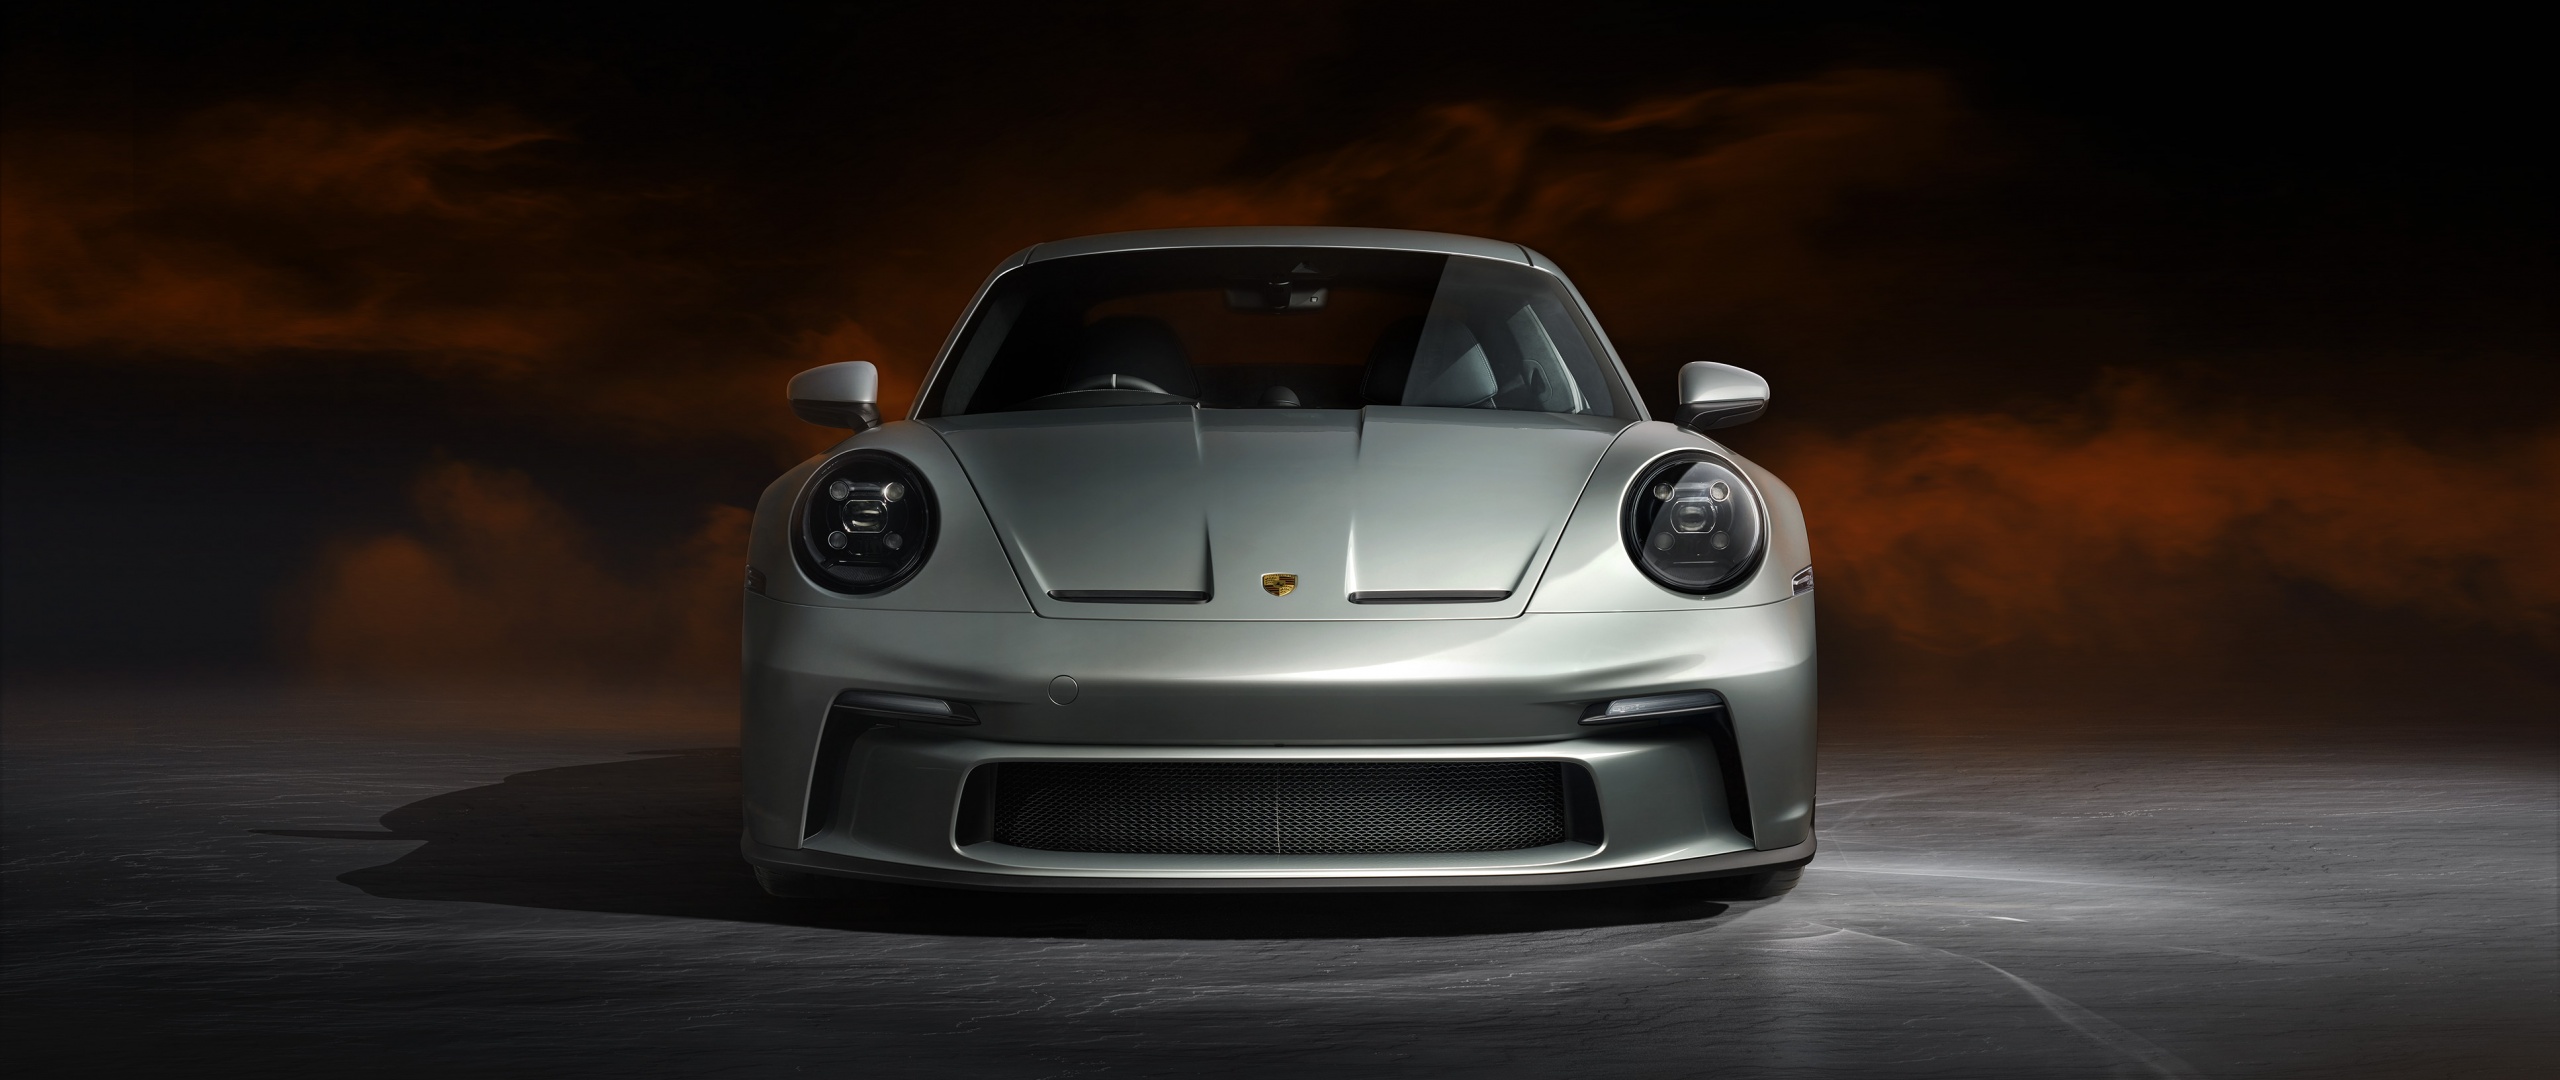 Download Porsche 911 Gt3 wallpapers for mobile phone free Porsche 911  Gt3 HD pictures